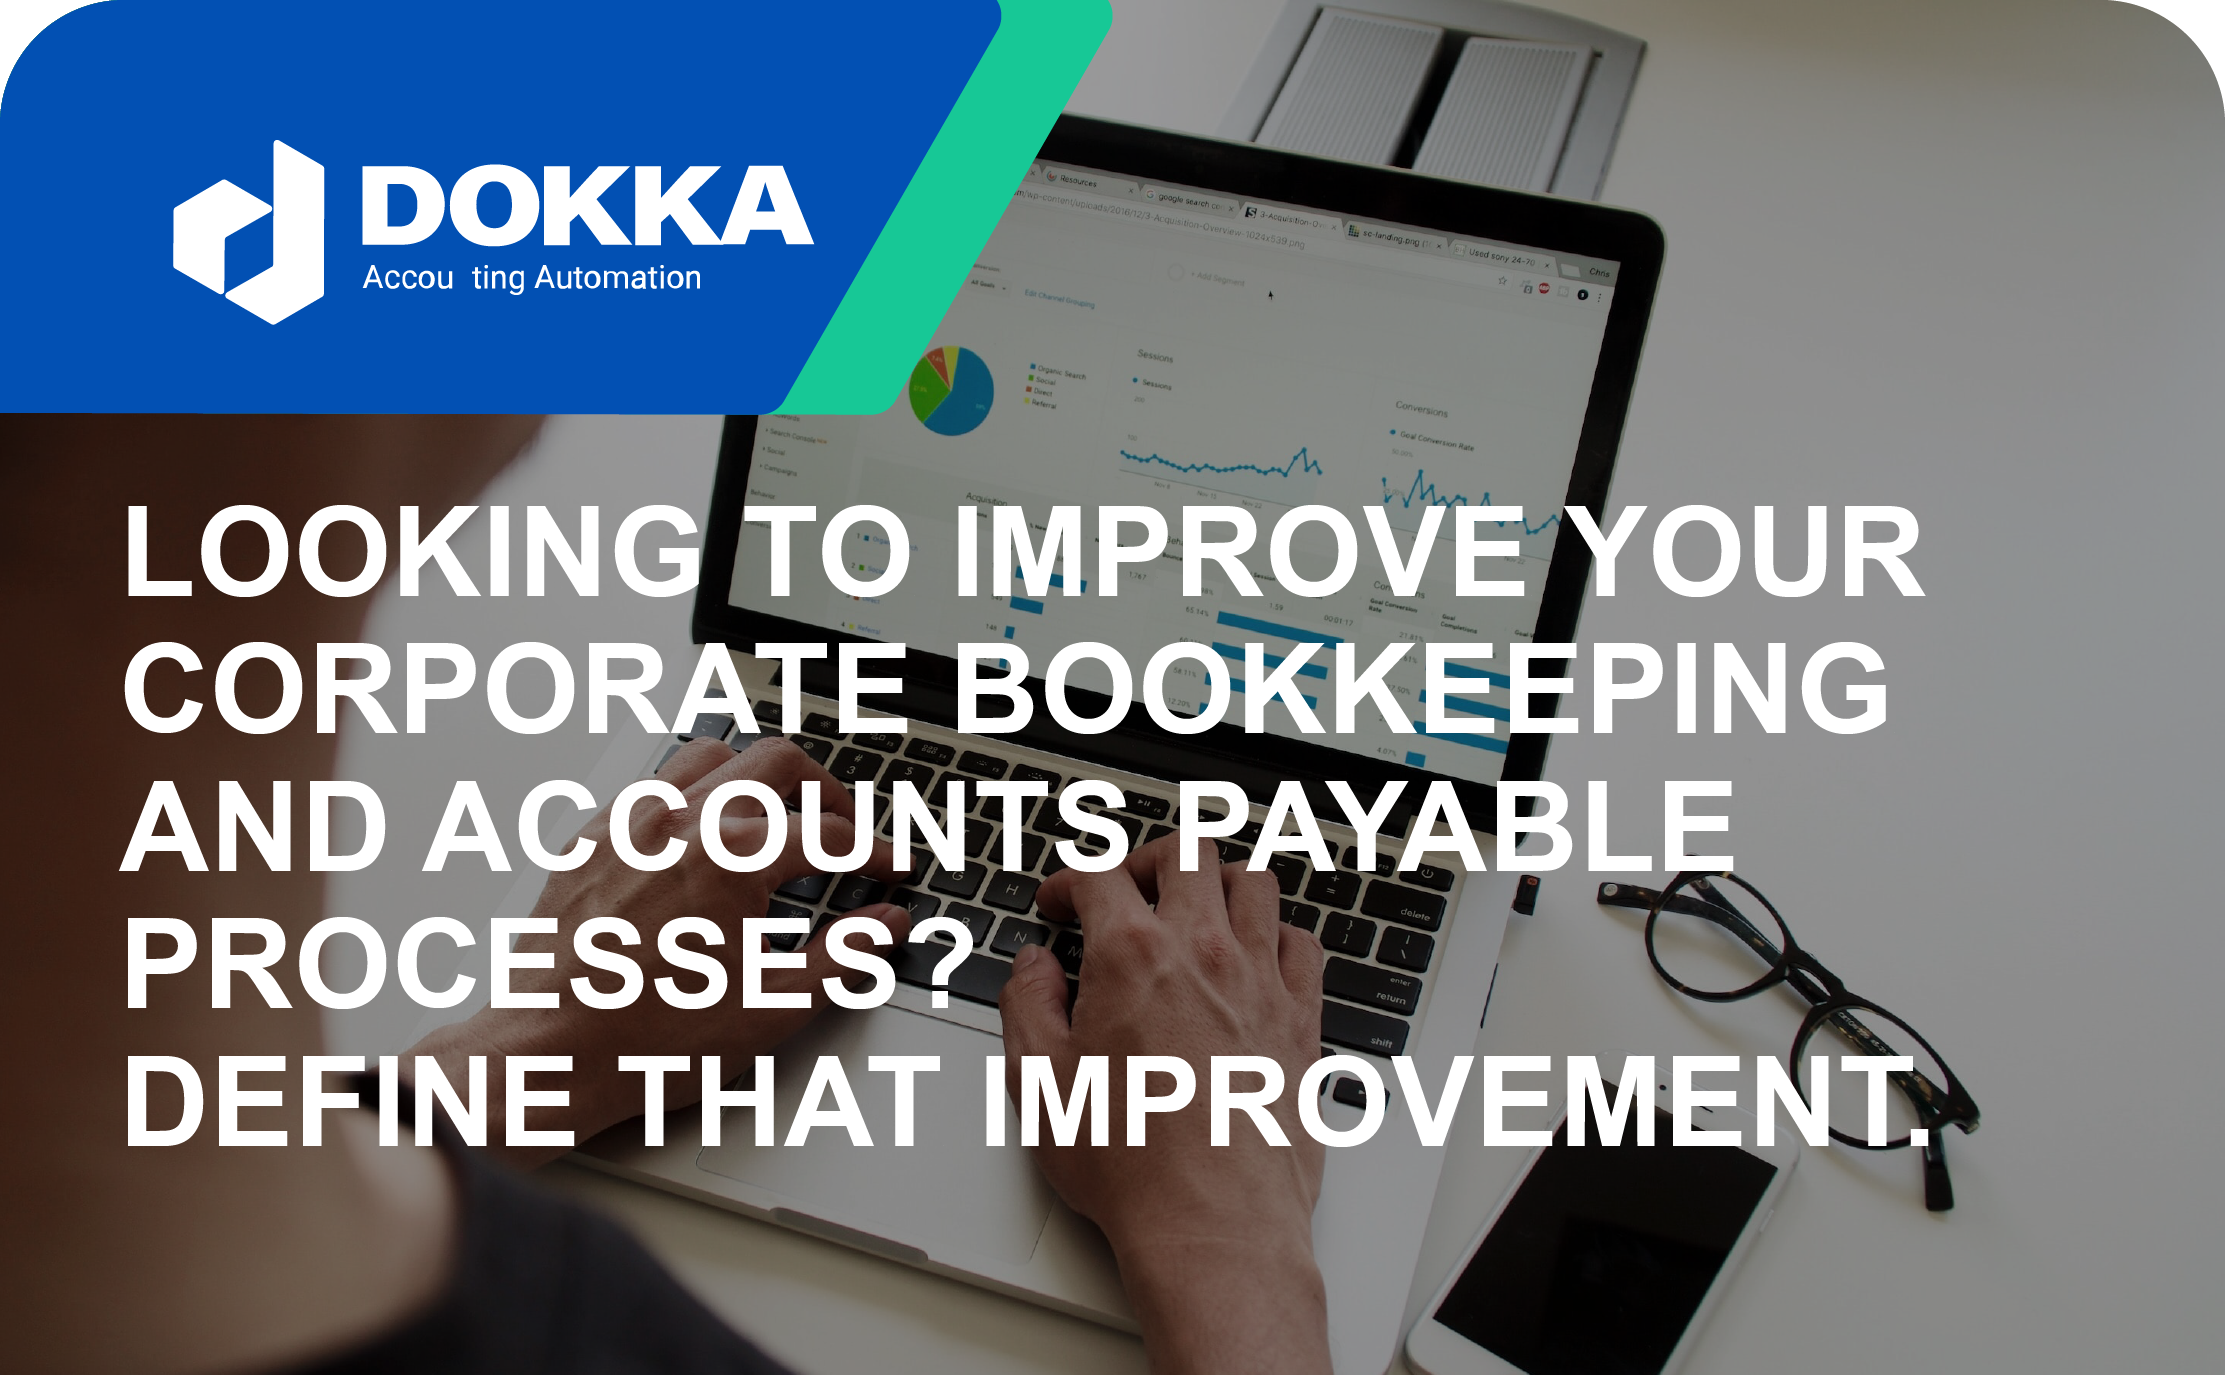 Looking to improve your corporate bookkeeping and accounts payable processes? Define that improvement.